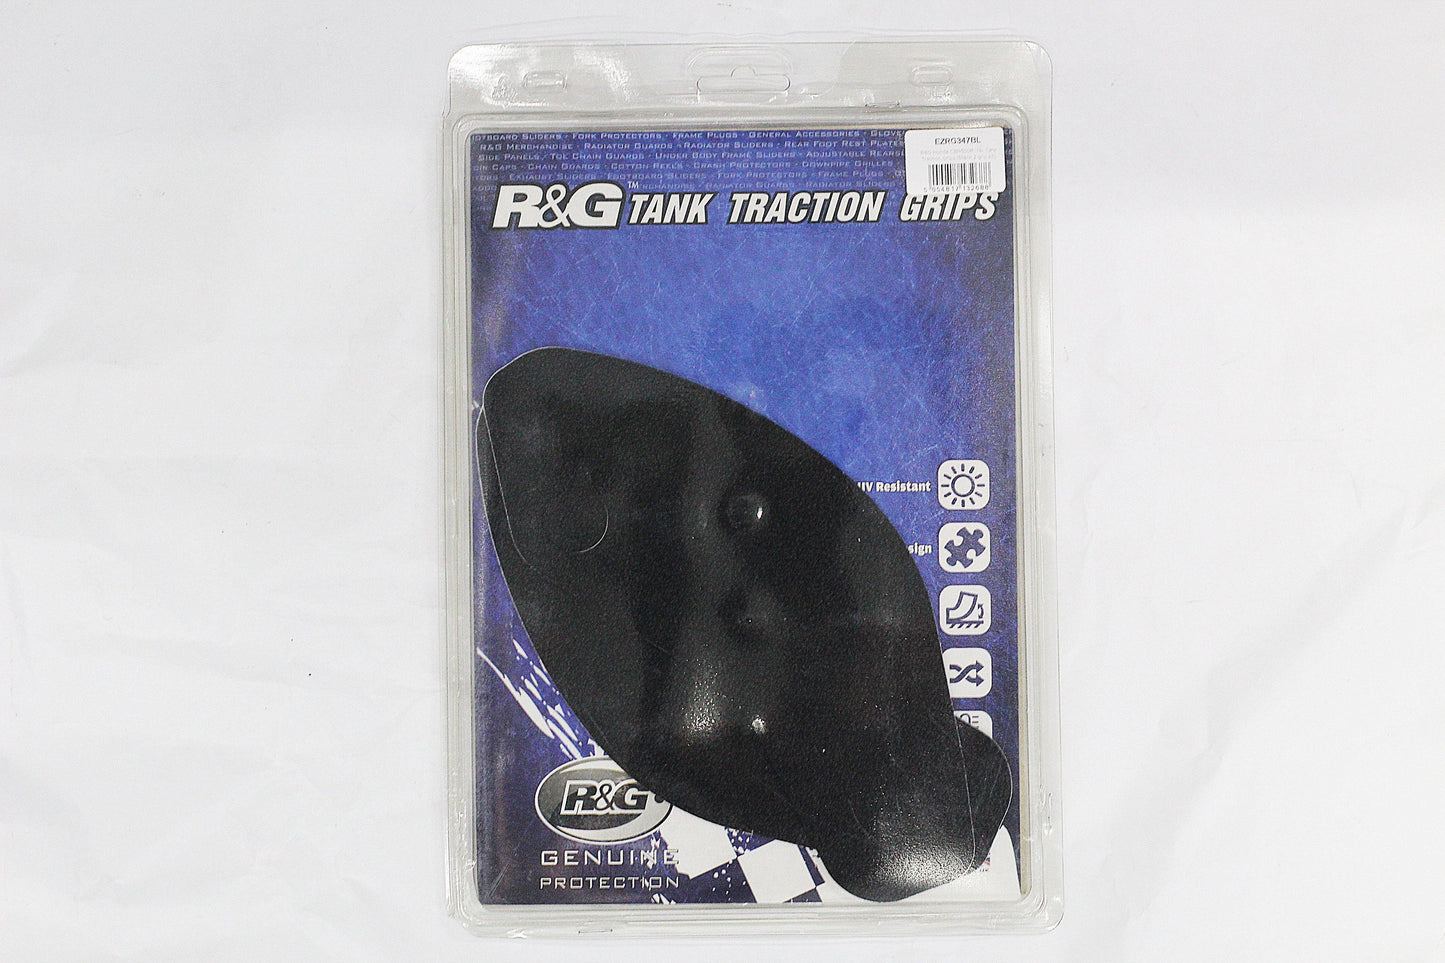 R&G Tank Traction Grip fits for Honda CBR500R ('19-) & CB500F ('19-) - Durian Bikers